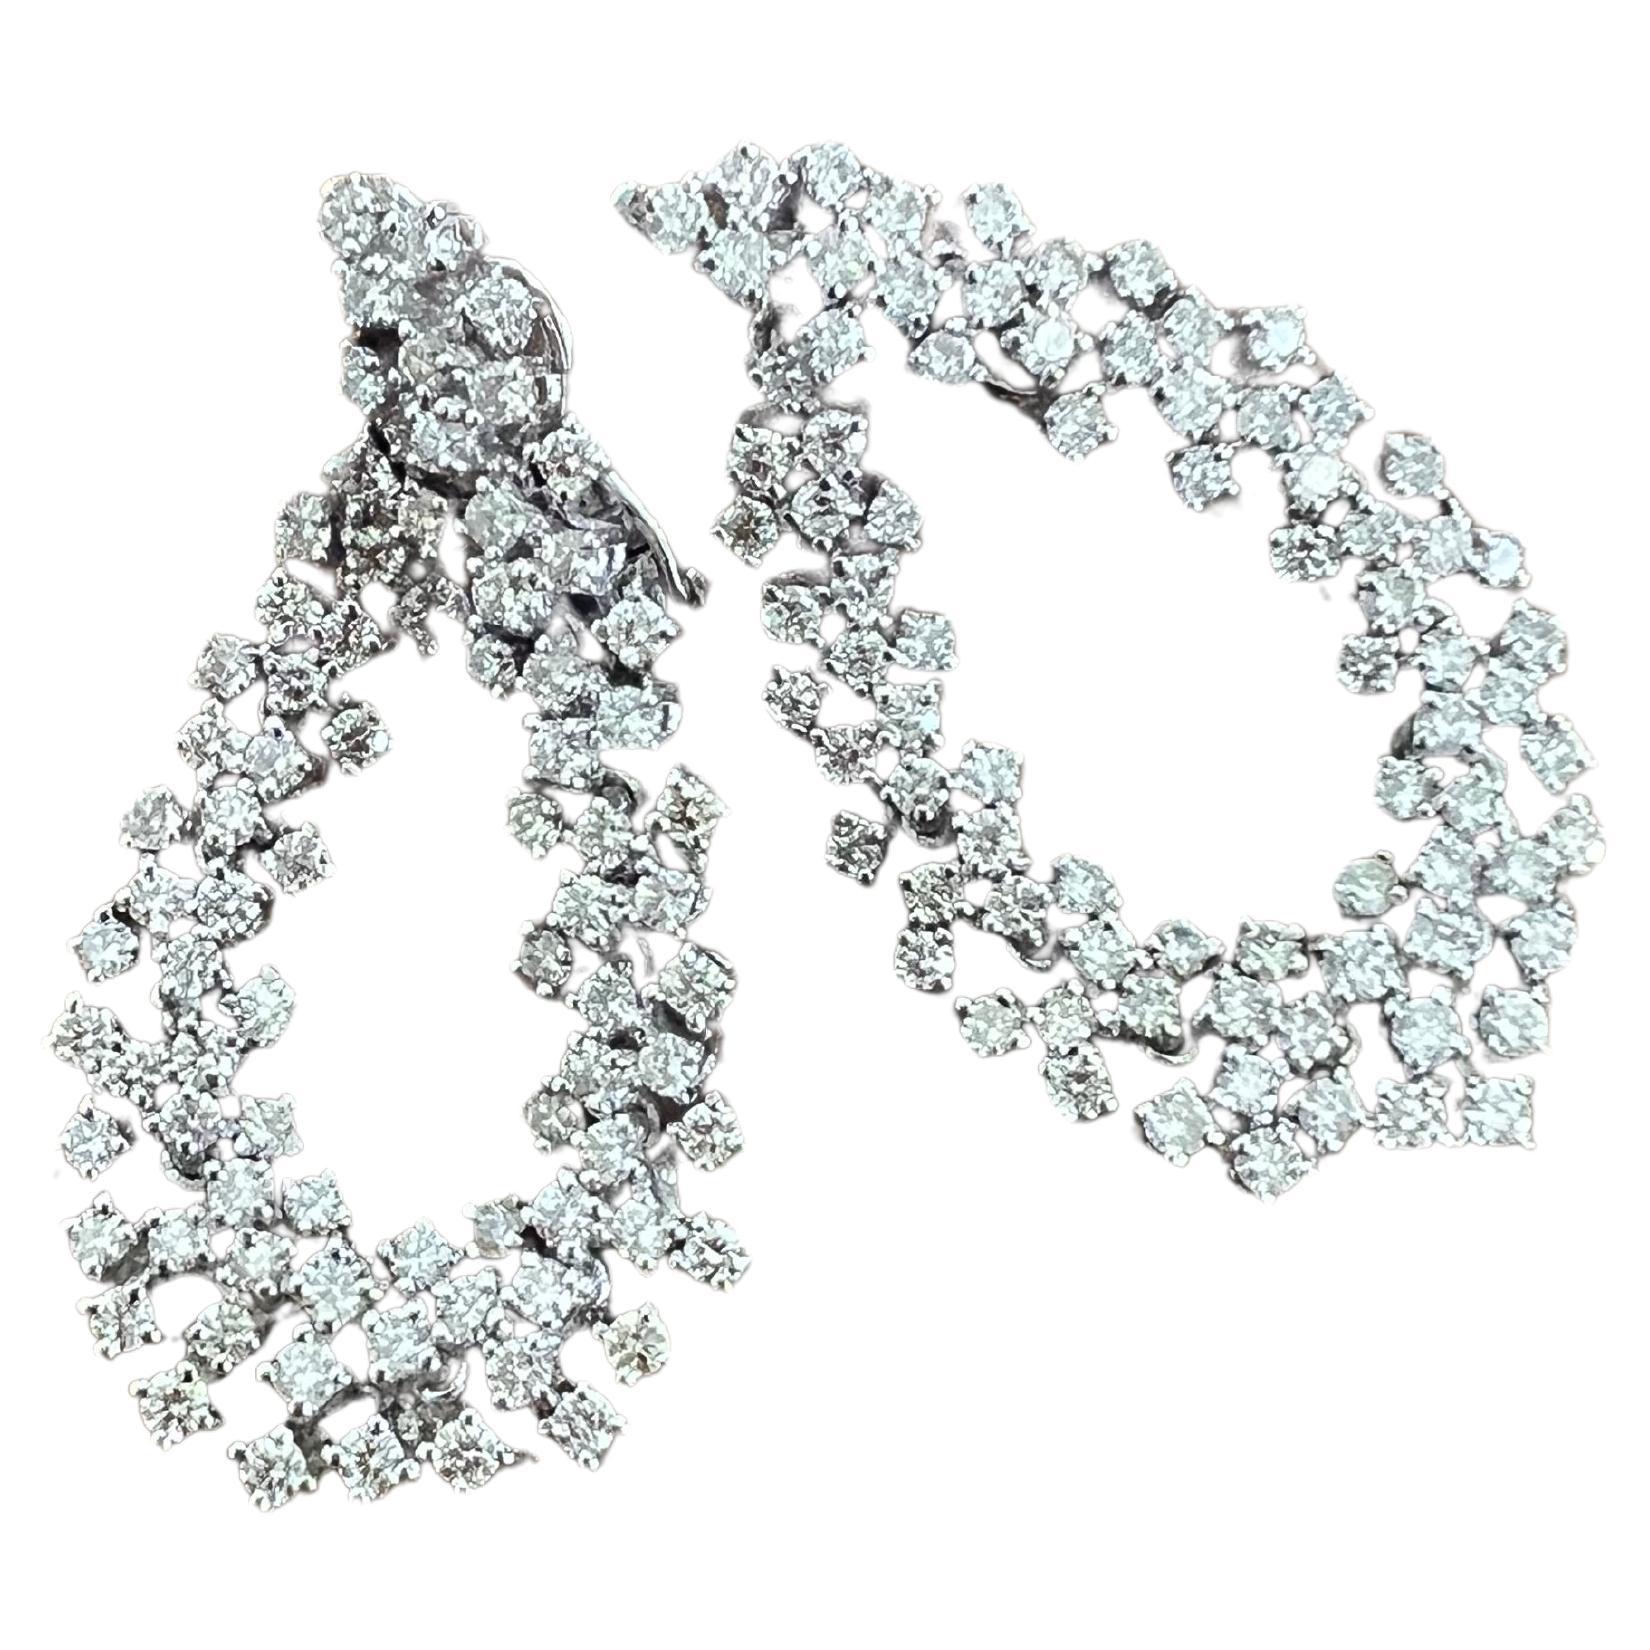 These earrings have Natural Round Cut White Diamonds that weigh 4.50 carats. The clarity and color of the earrings are VS-H. 

They are 1.5 inches long and are curated in 14 Karat White Gold with an approximate weight of 14.5 grams. 

Stunning